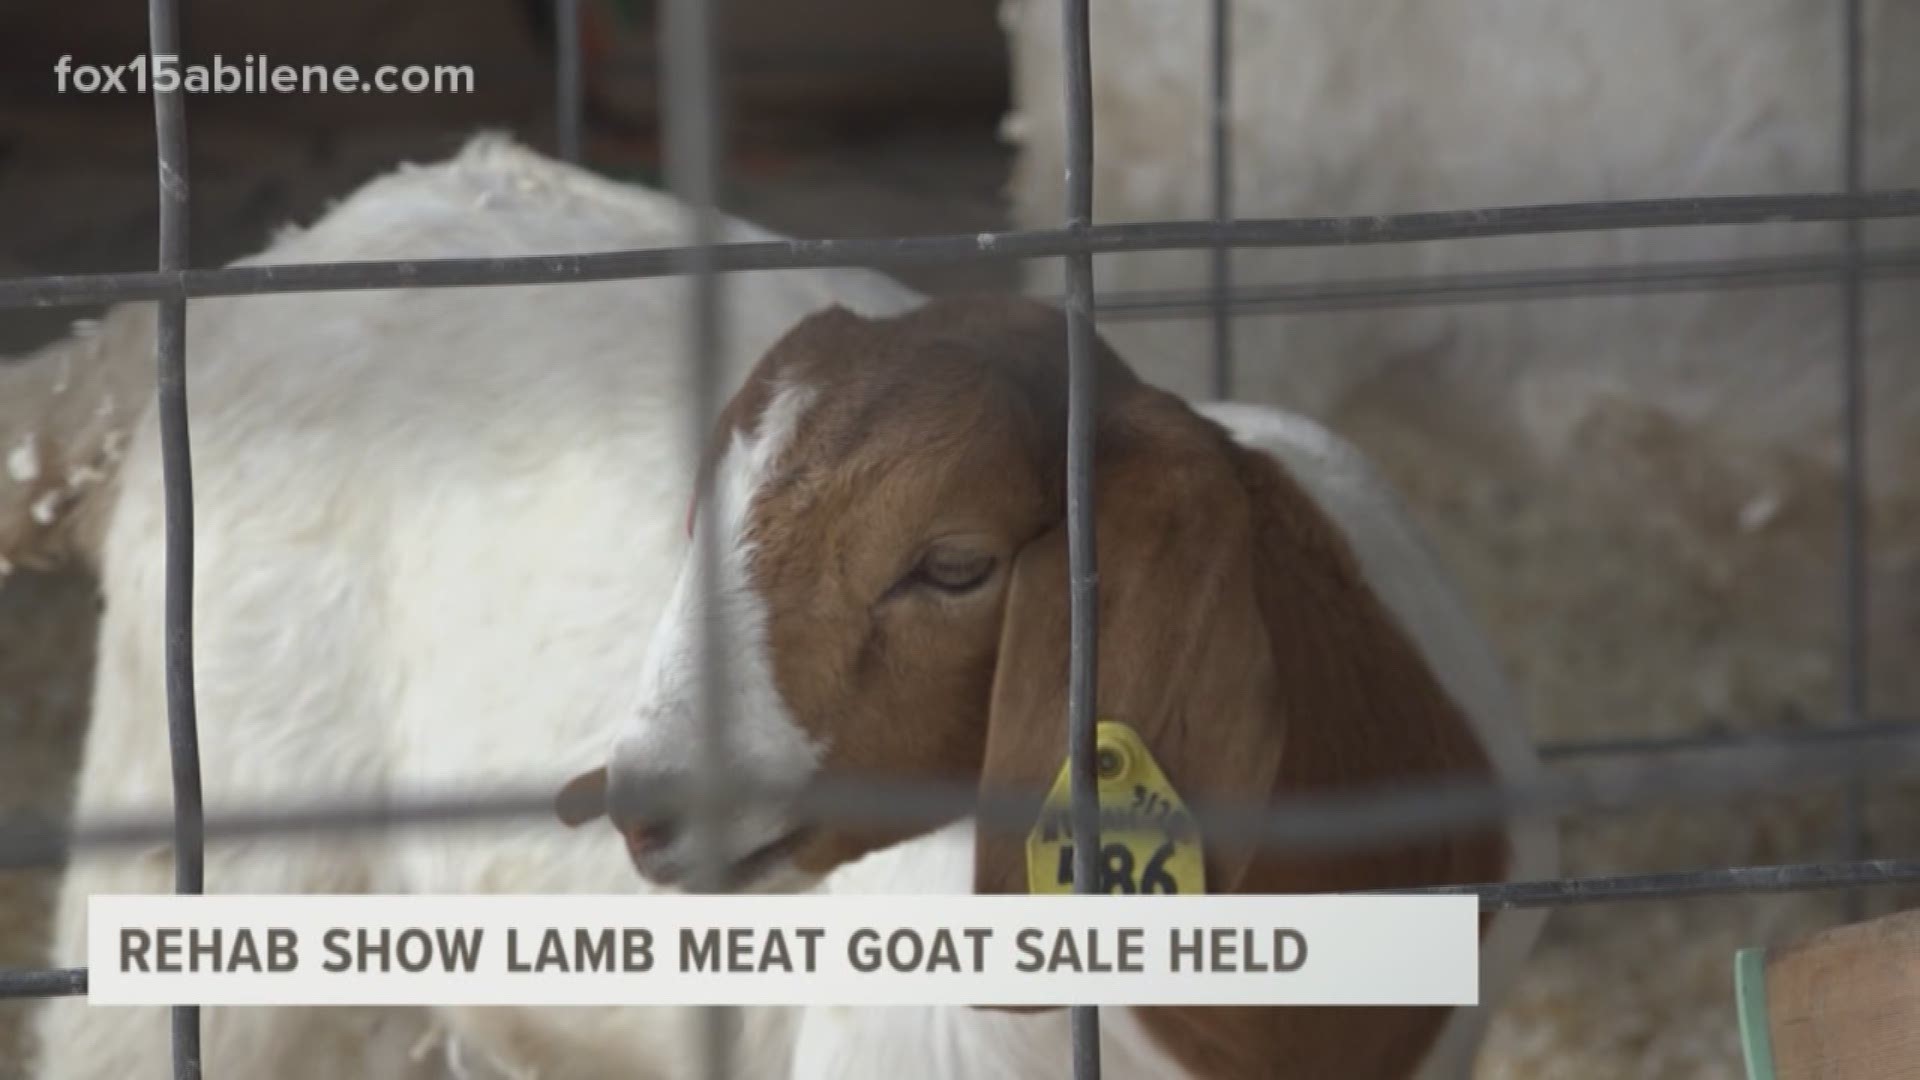 The annual 'Rehab Show Lamb and Meat Goat Sale' was held Tuesday.